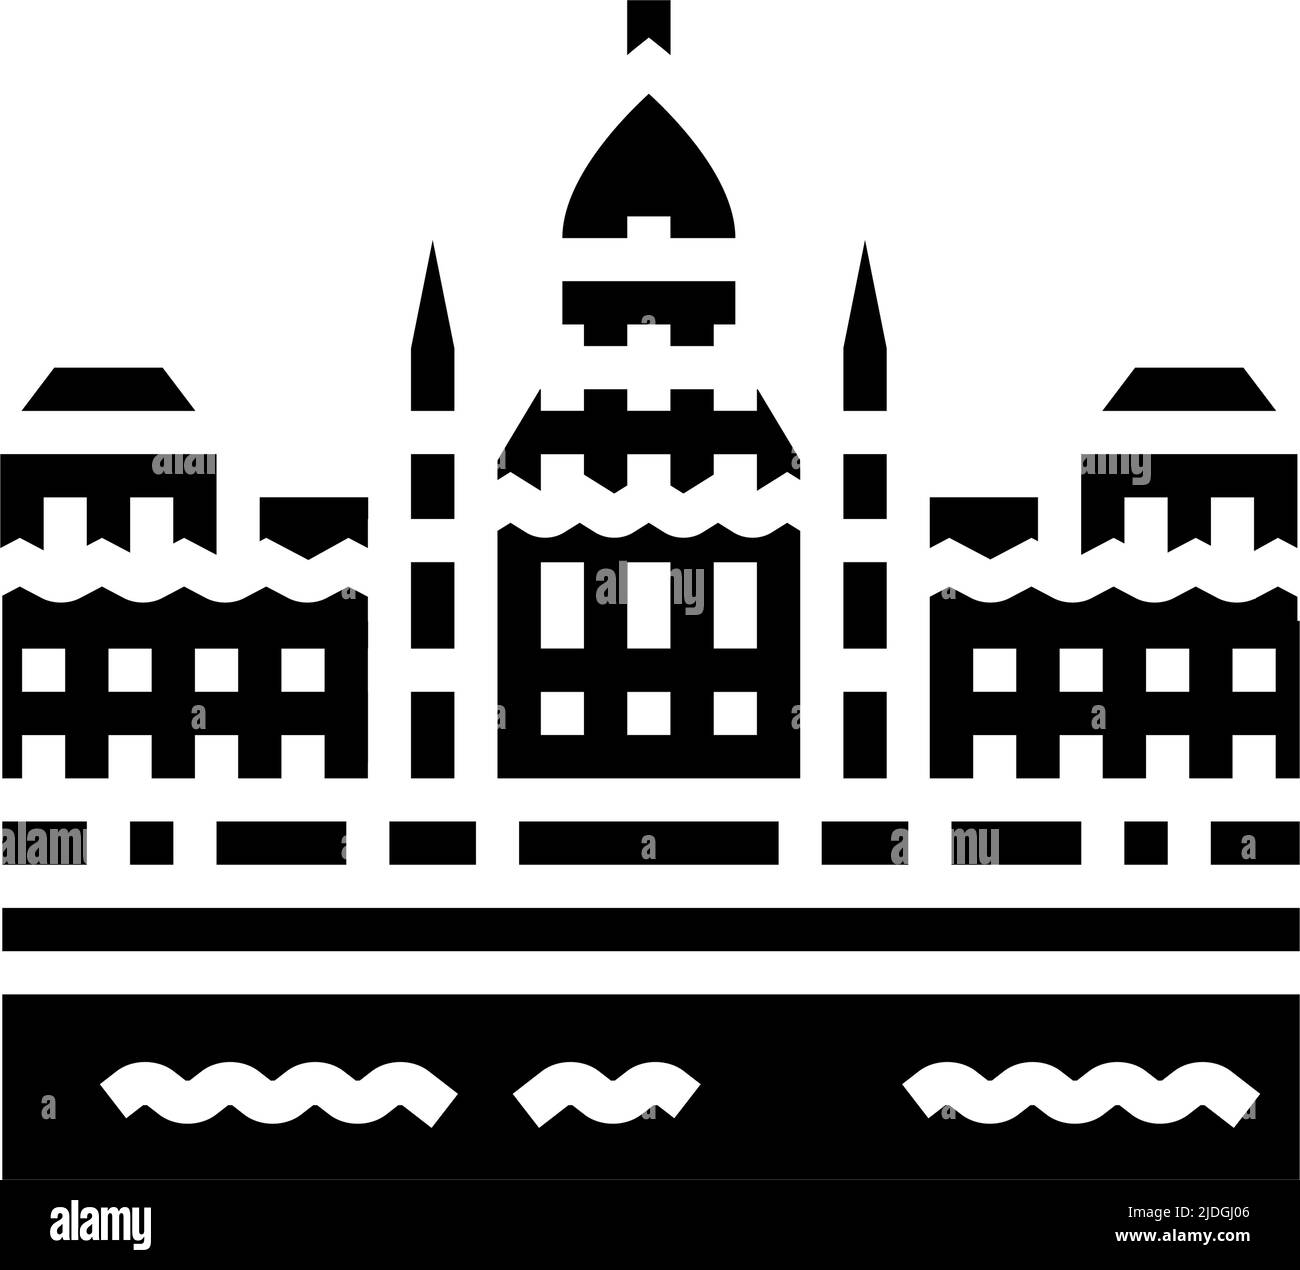 hungarian parliament building glyph icon vector illustration Stock Vector